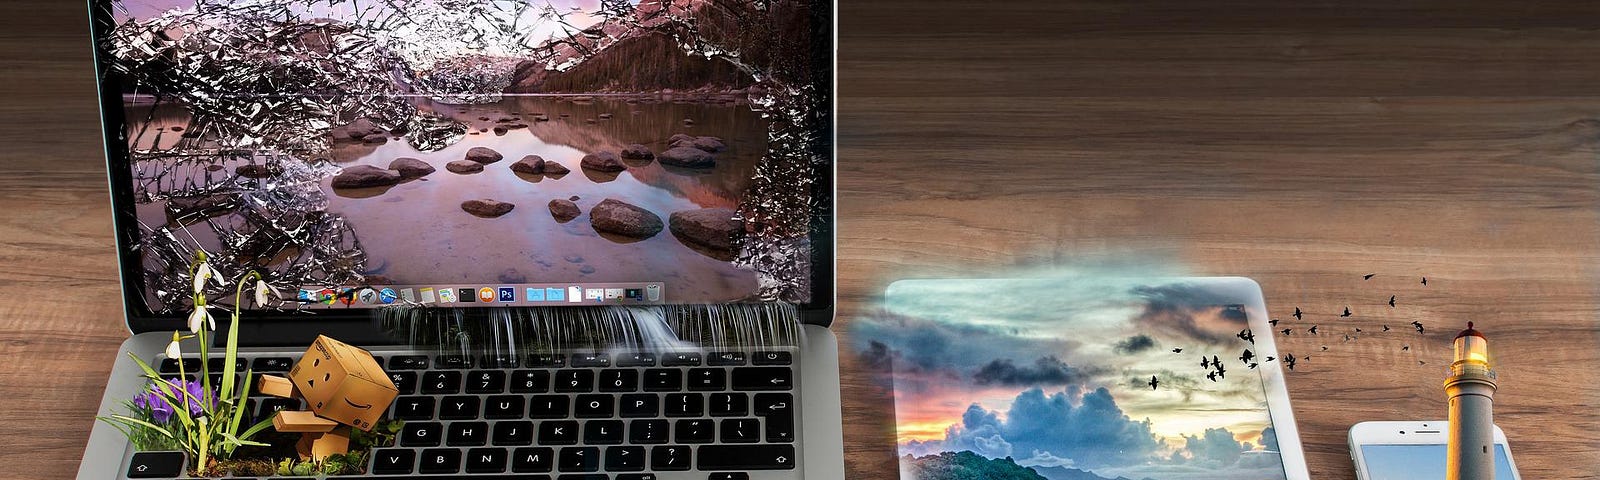 A MacBook, an iPad and an iPhone next to each other and the screens flow coastline scenery that overflows the edges of the devices forming a surrealistic but beautiful flow.